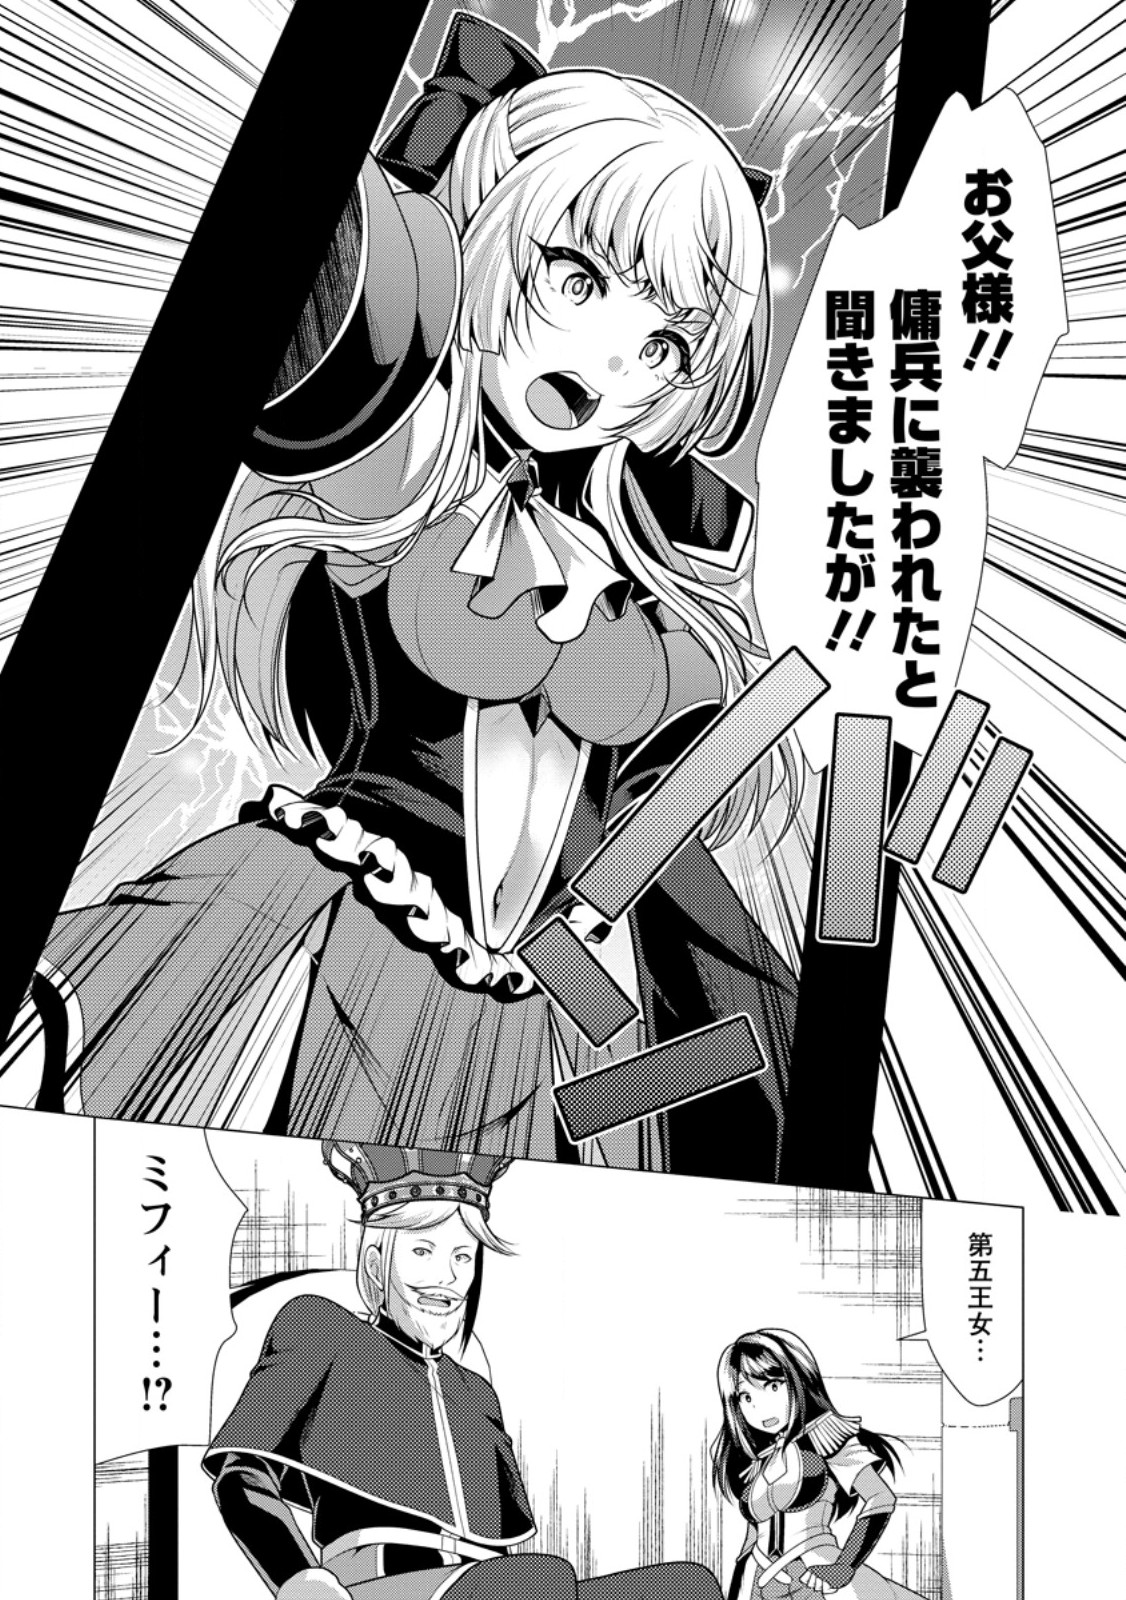 Hisshou Dungeon Unei Houhou - Chapter 59.2 - Page 10